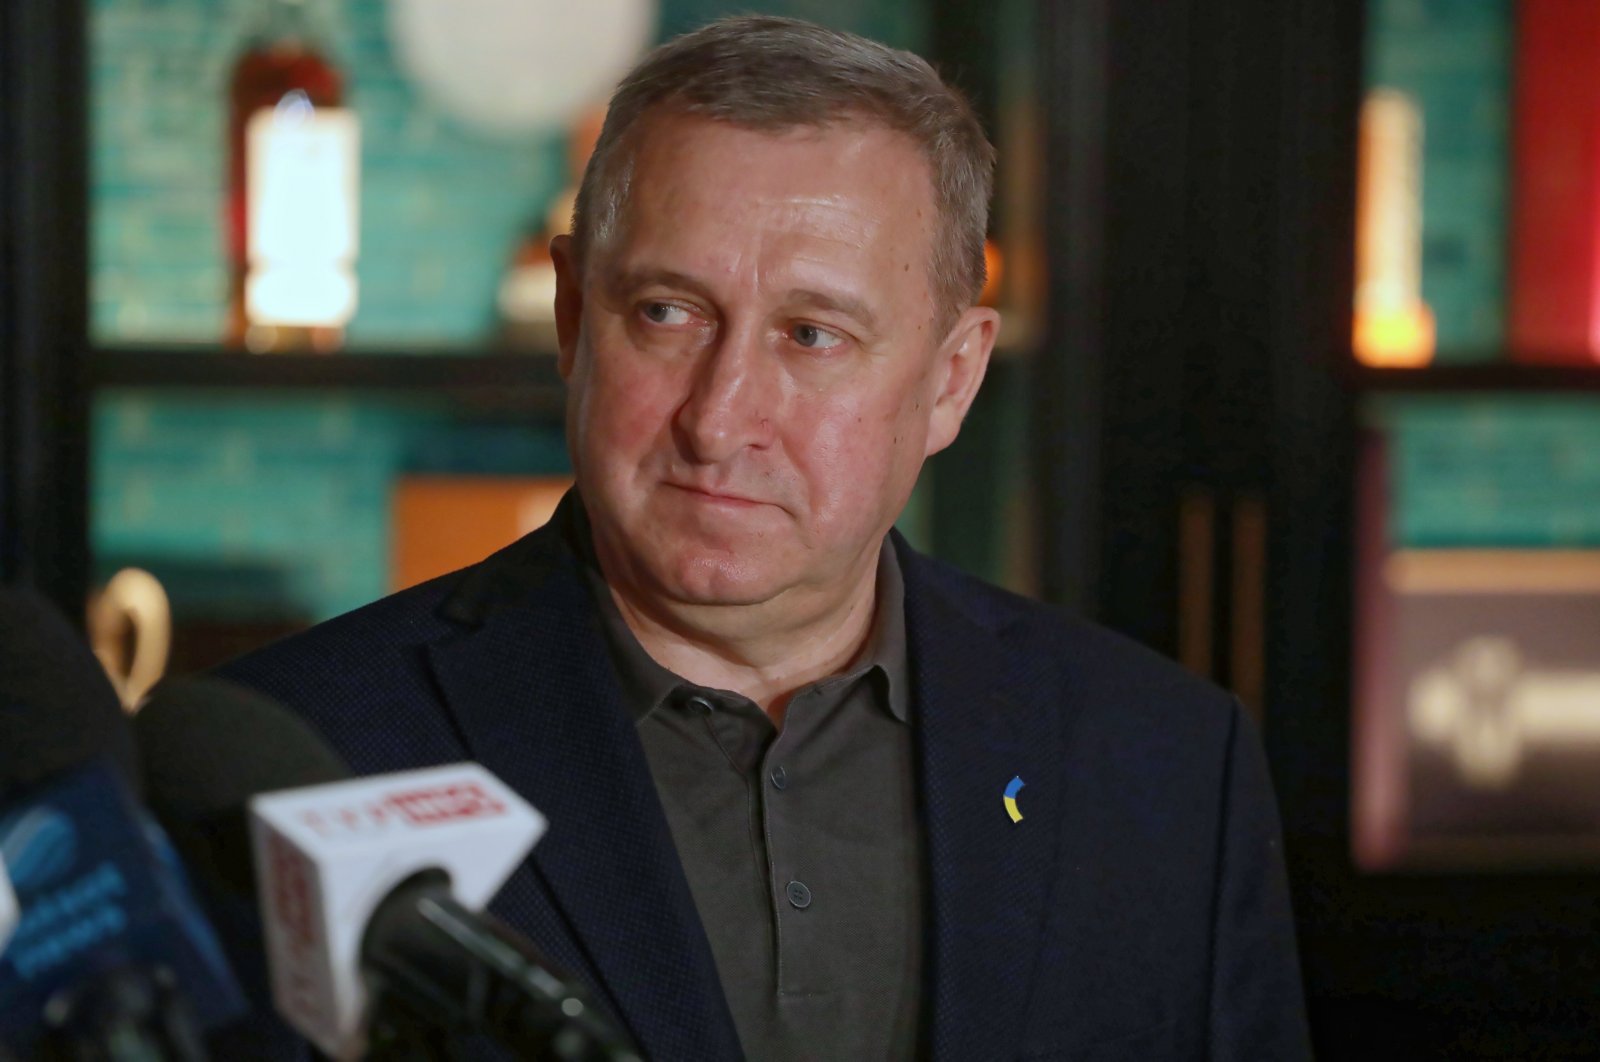 Ukrainian Ambassador to Poland Andrii Deshchytsia during a press conference after his meeting on aid for Ukrainian refugees with Rotary International President Shekhar Mehta, at the Hotel Europejski in Warsaw, Poland, March 21, 2022. (EPA File Photo)